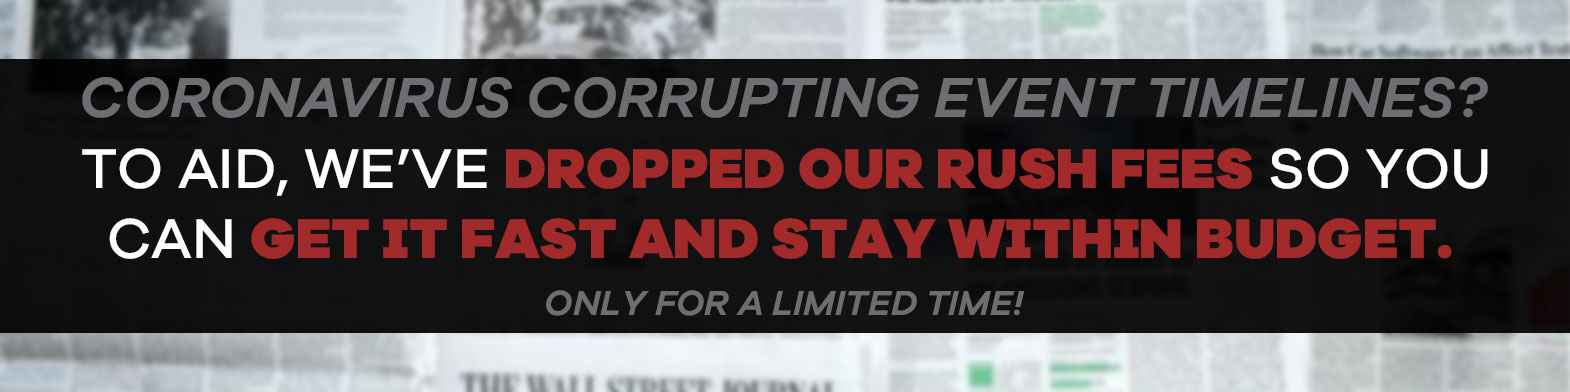 Coronavirus corrupting event timelines? To aid, we've dropped our rush fees so you can get it fast and stay within budget. Only for a limited time!